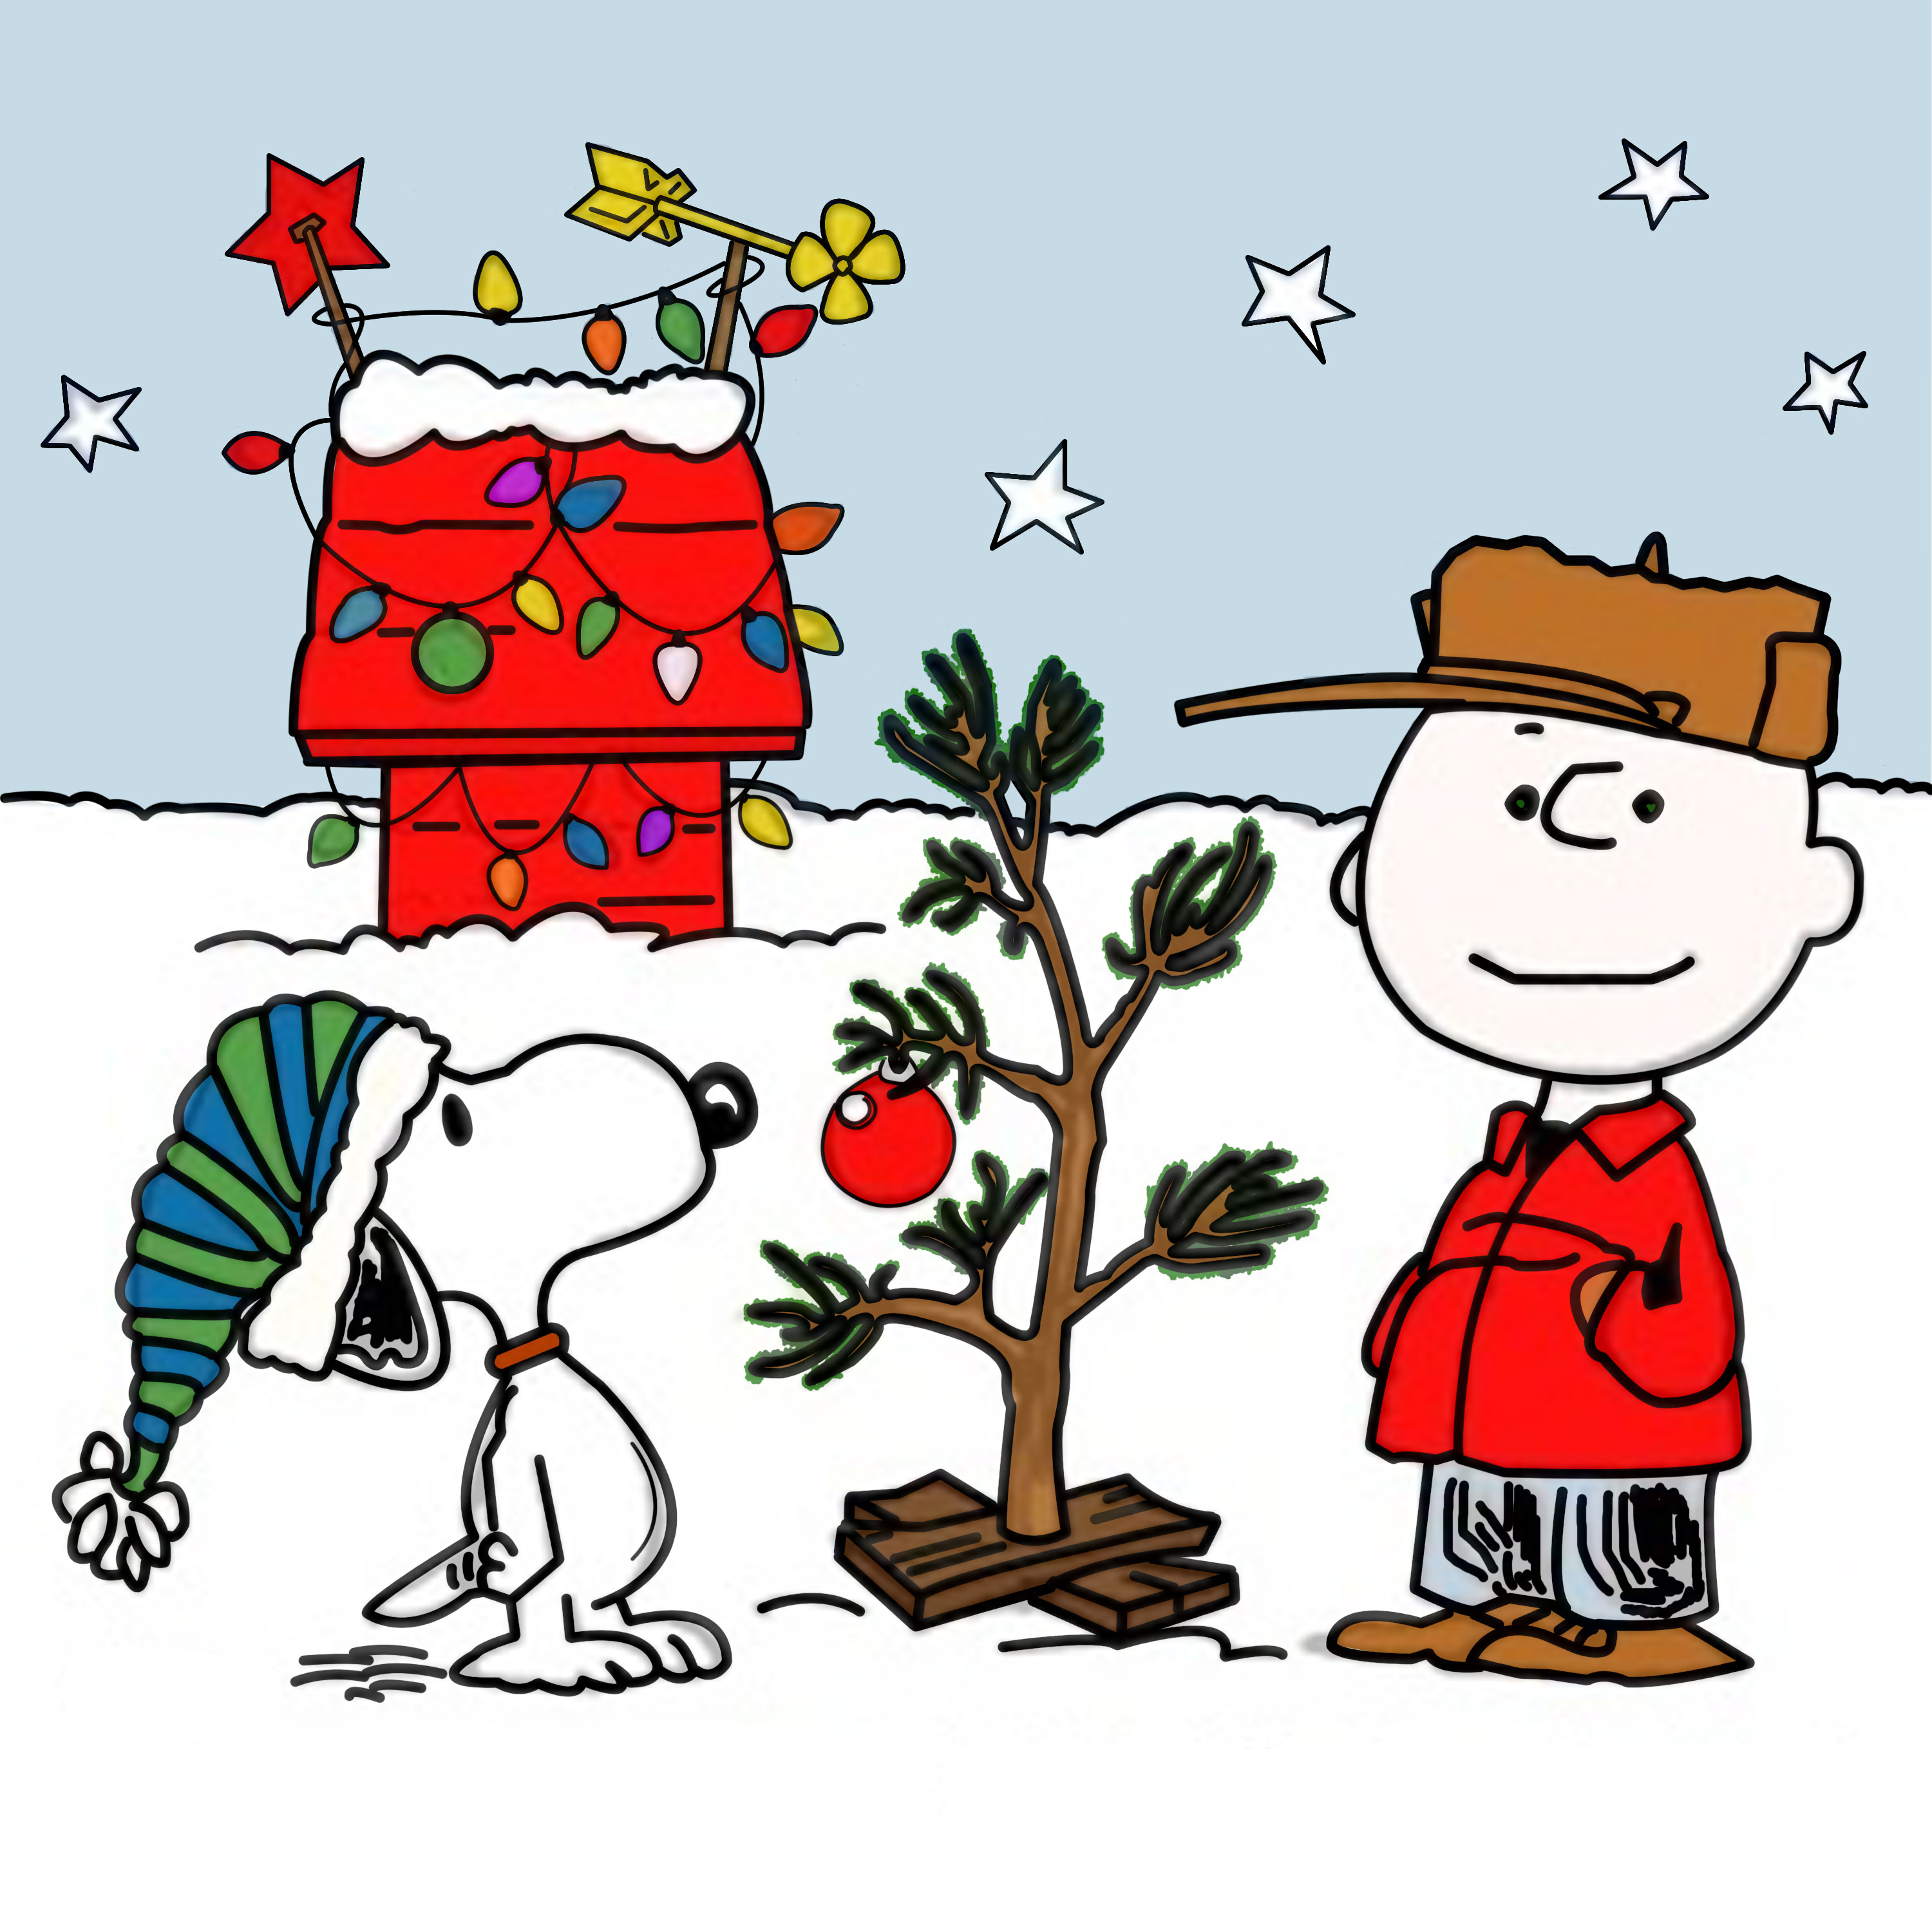 Background Pictures Fe Snoopy Charlie Brown Christmas Wallpaper